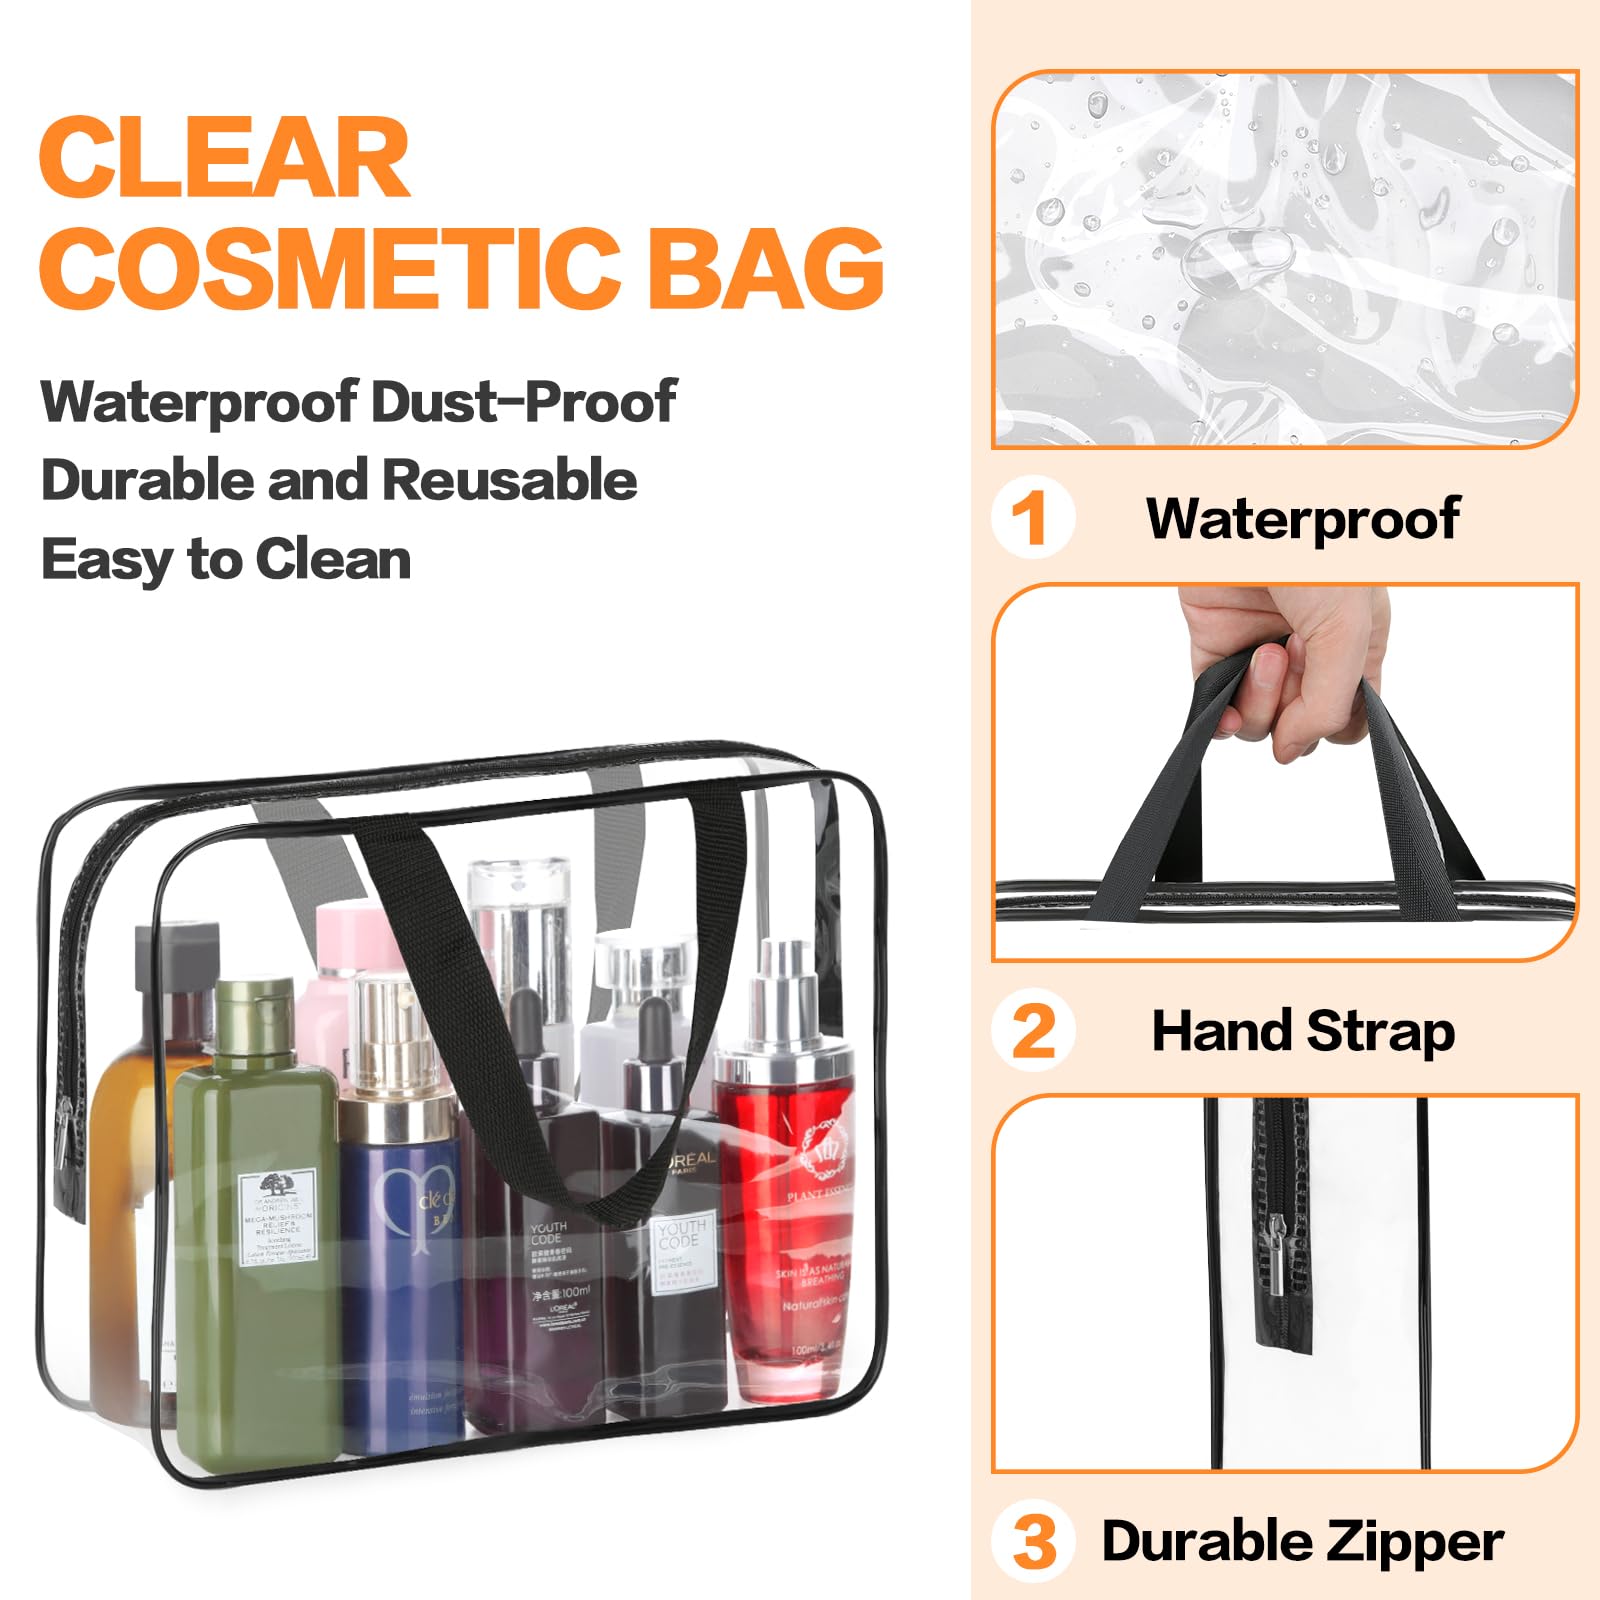 HAOGUAGUA 3 Pieces Large Clear Travel Bags for Toiletries, Waterproof Clear Plastic Cosmetic Makeup Bags, Transparent Packing Organizer Storage Bags (Black)